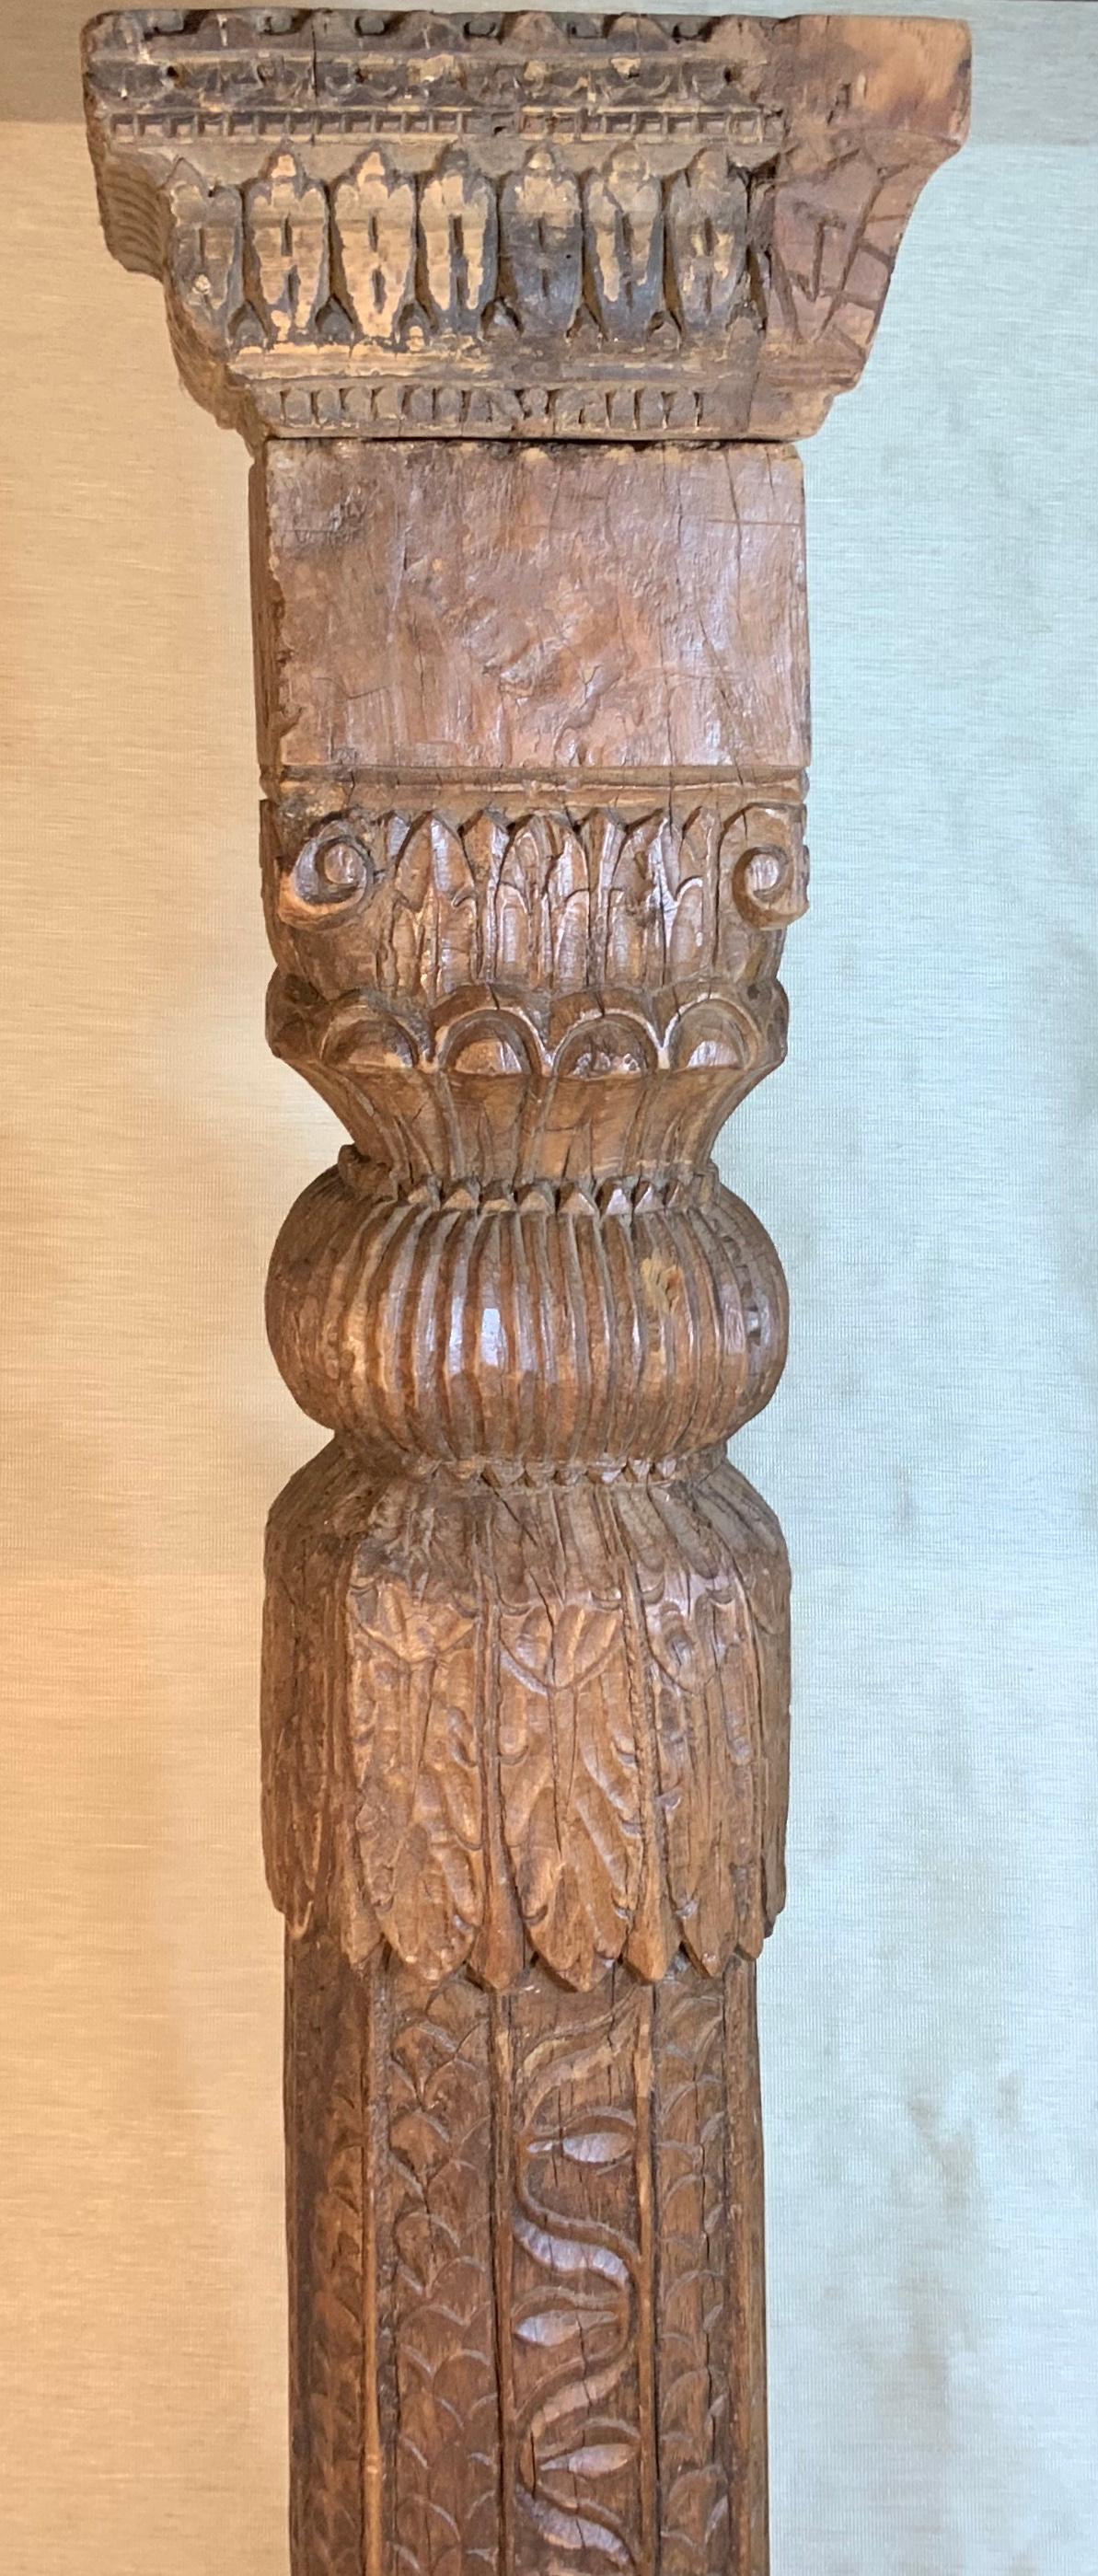 Highly carved solid teak wood column that was made for indoor use in opulent homes in India. This column stood the test of time and was made by hand picked artisans. Great decorative object of art for display / or even converting it to a floor lamp